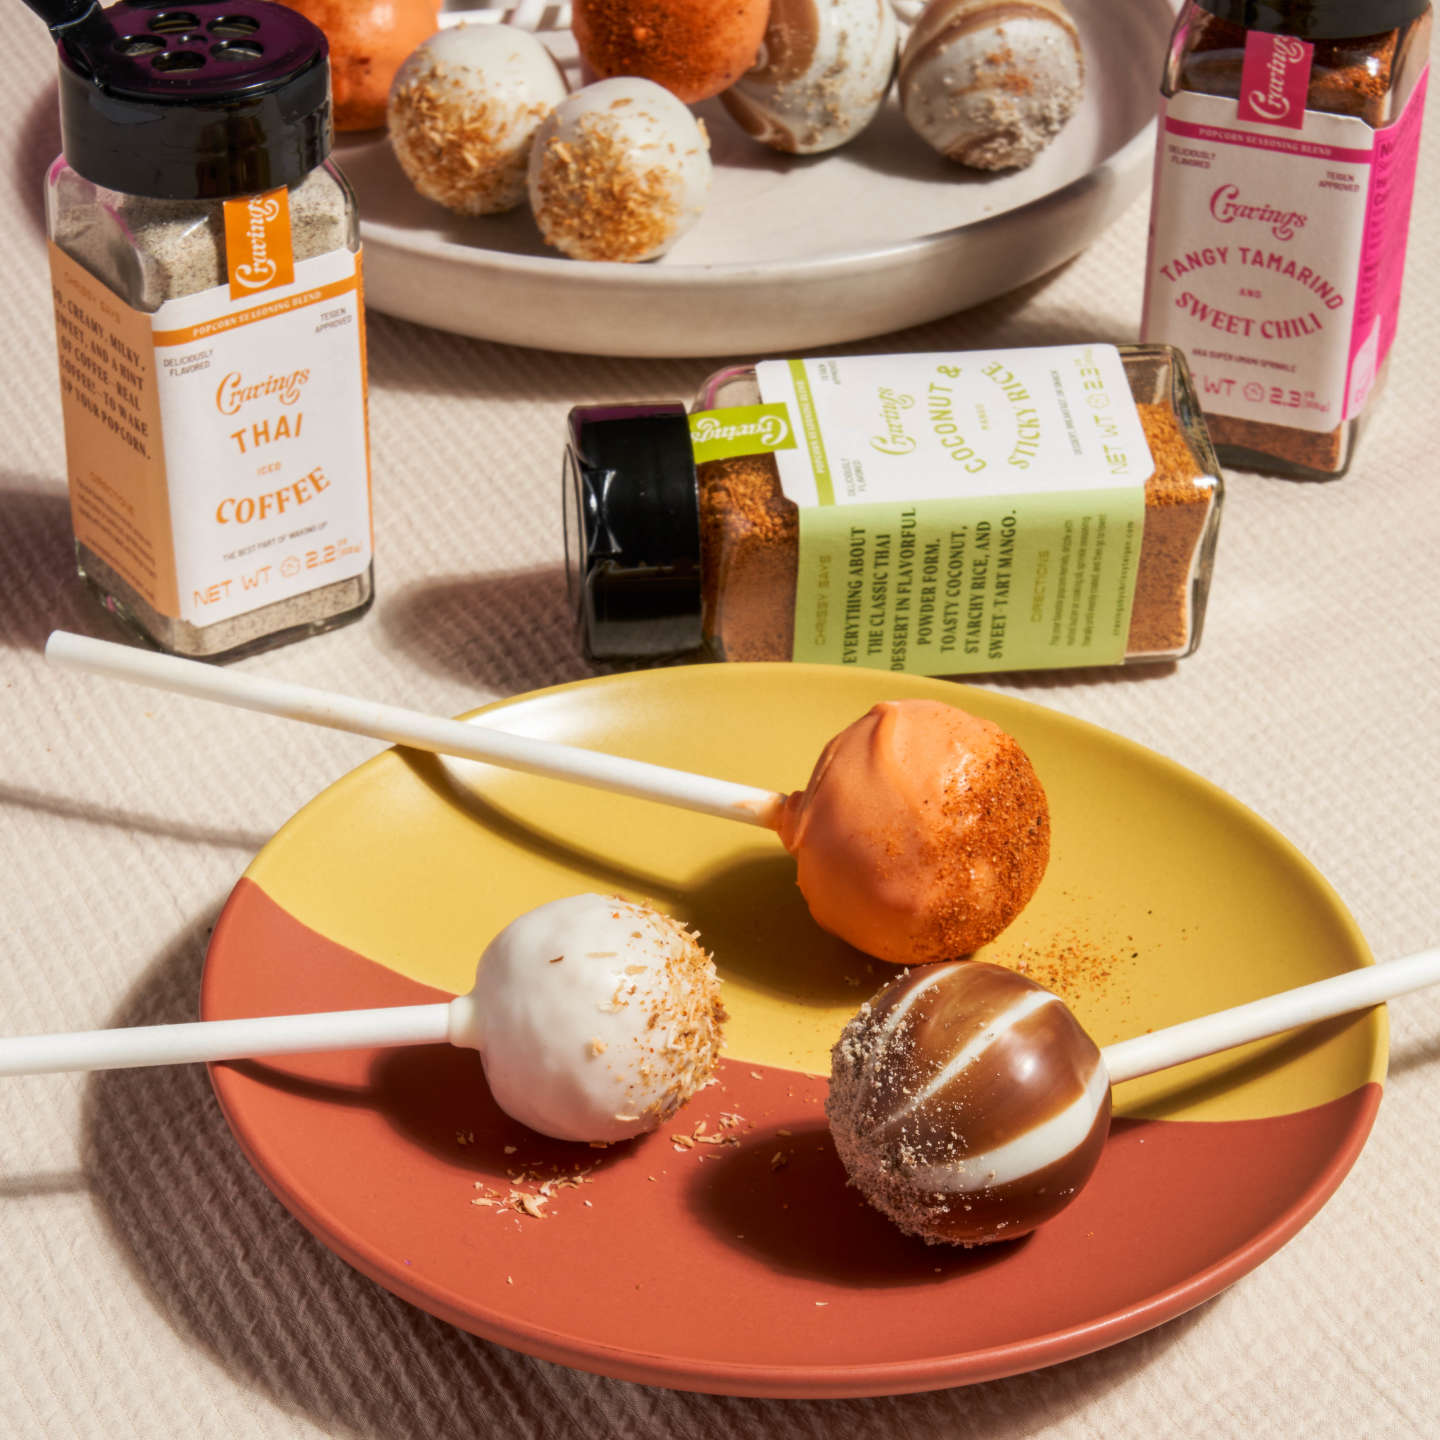 Haringen Omringd Philadelphia Cravings | Our Top Tips & Hacks to Make Perfect Cake Pops Every Time